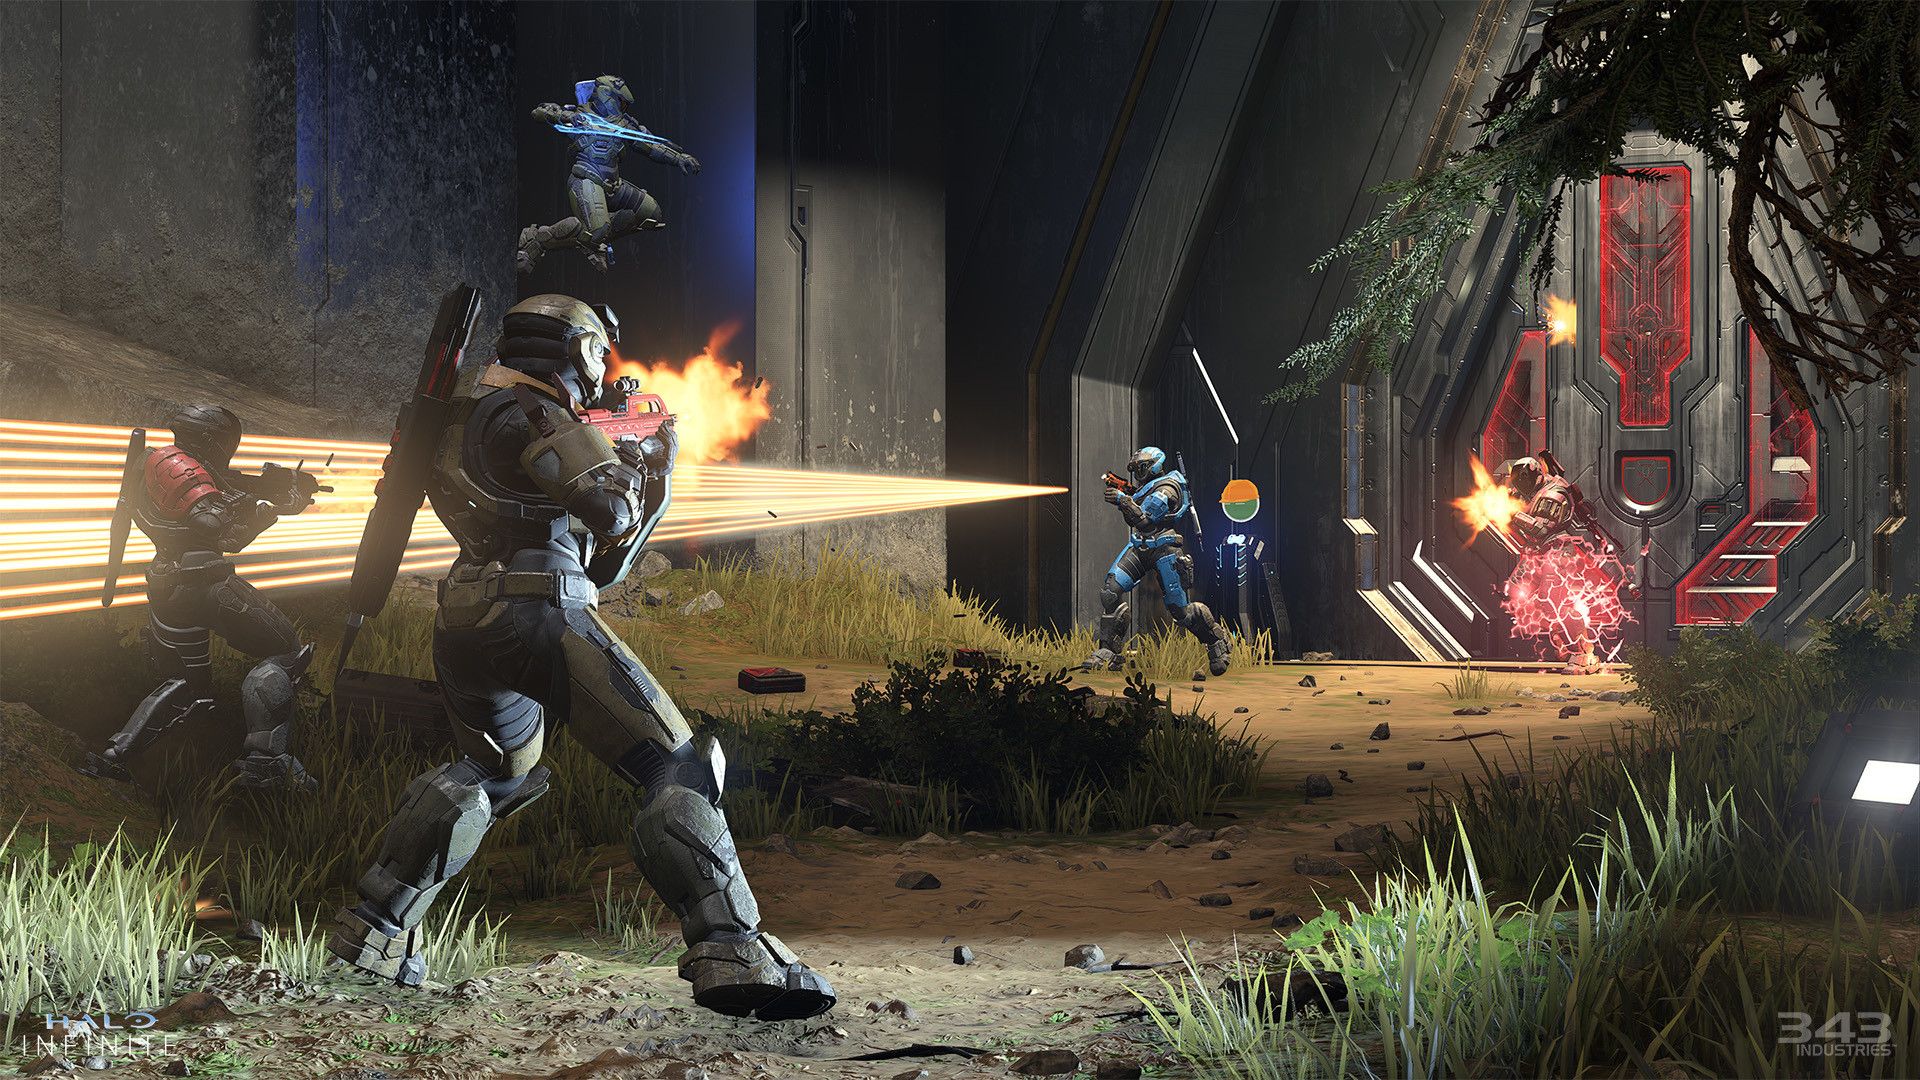 Microsoft is giving free PC Game Pass trials to non-members who played  Halo, Forza or AoE4